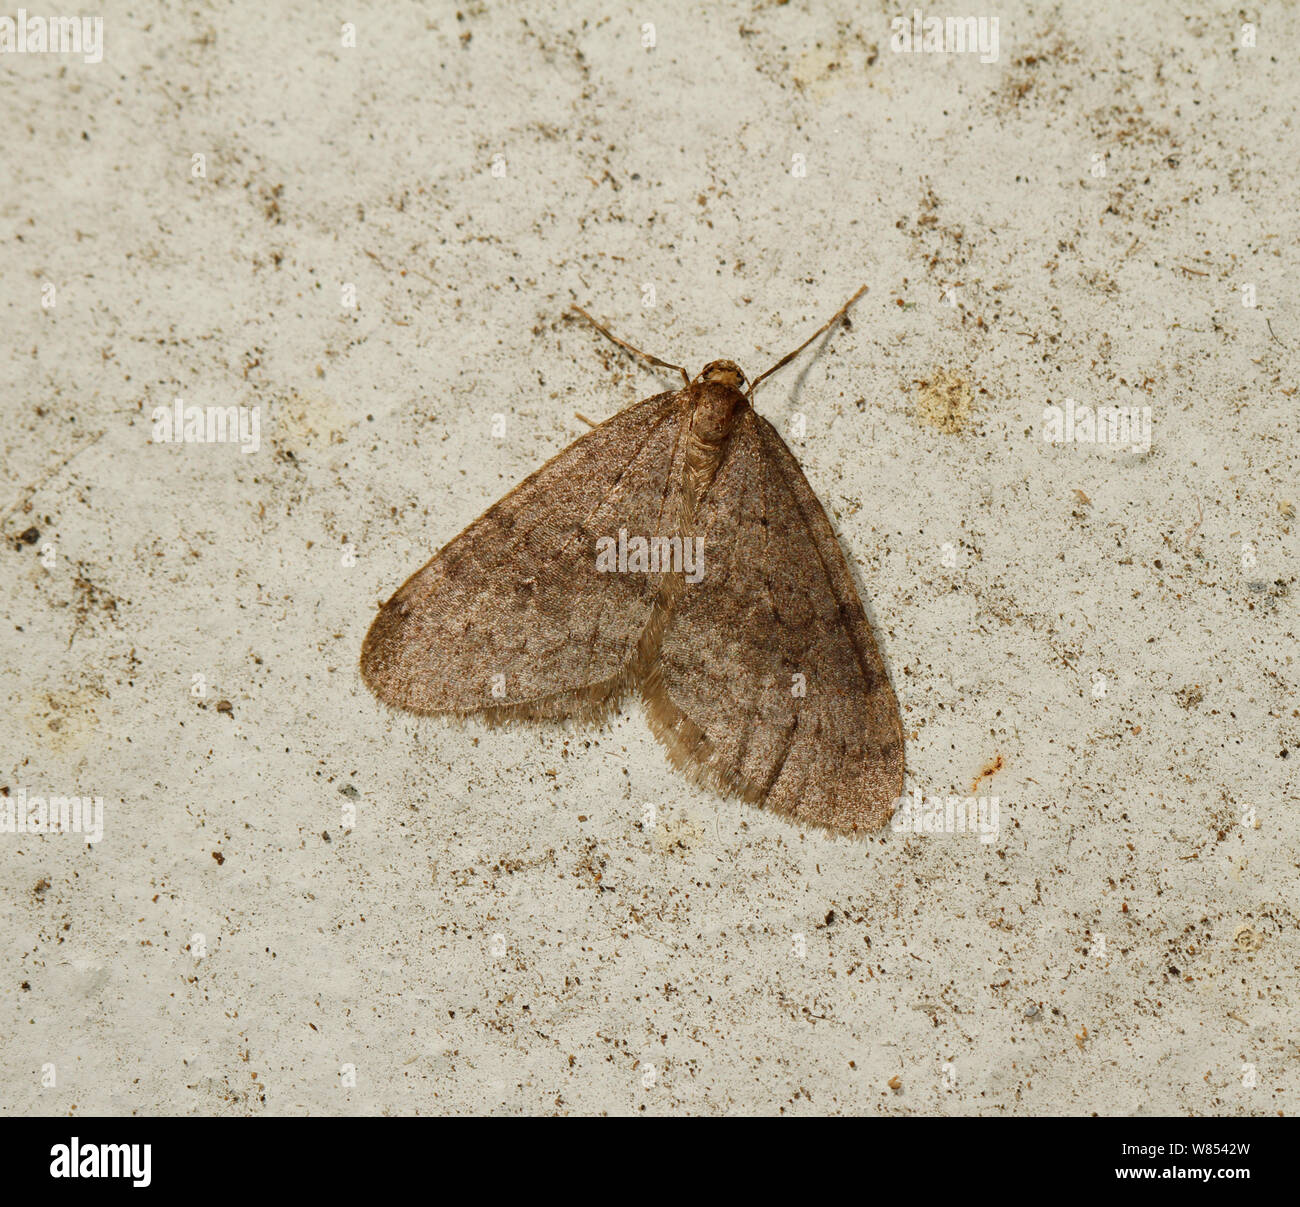 Winter Moth (Operophtera brumata), a winter flying moth from Oct - Jan, responsible for defoliating various trees particularly apple. UK, December. Stock Photo